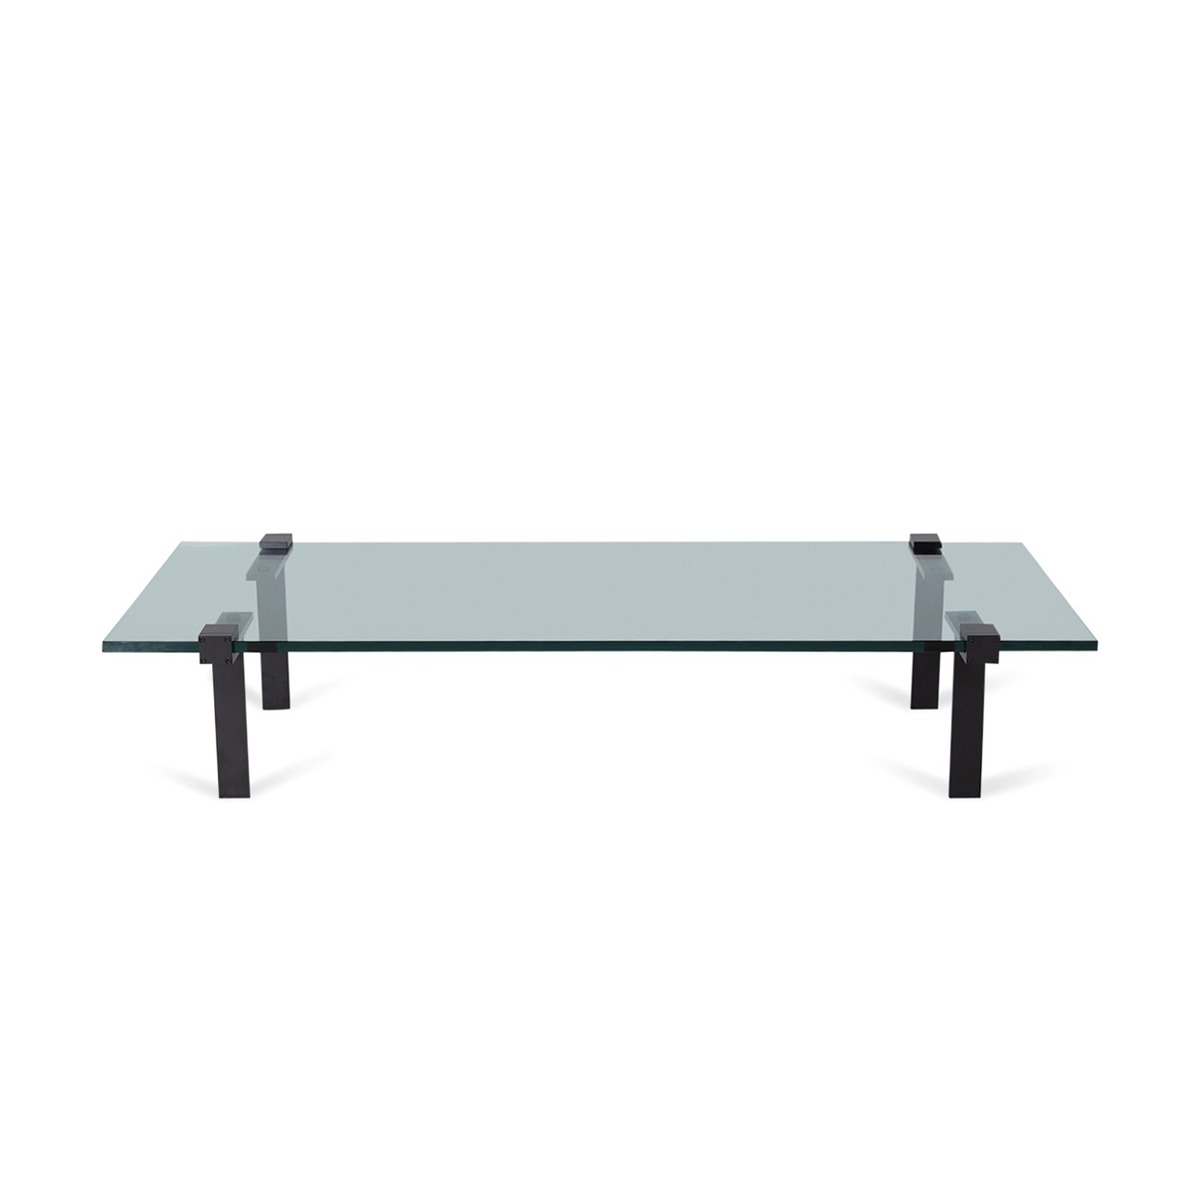 Gelderland 7920 T-Table Coffee Table - 2size